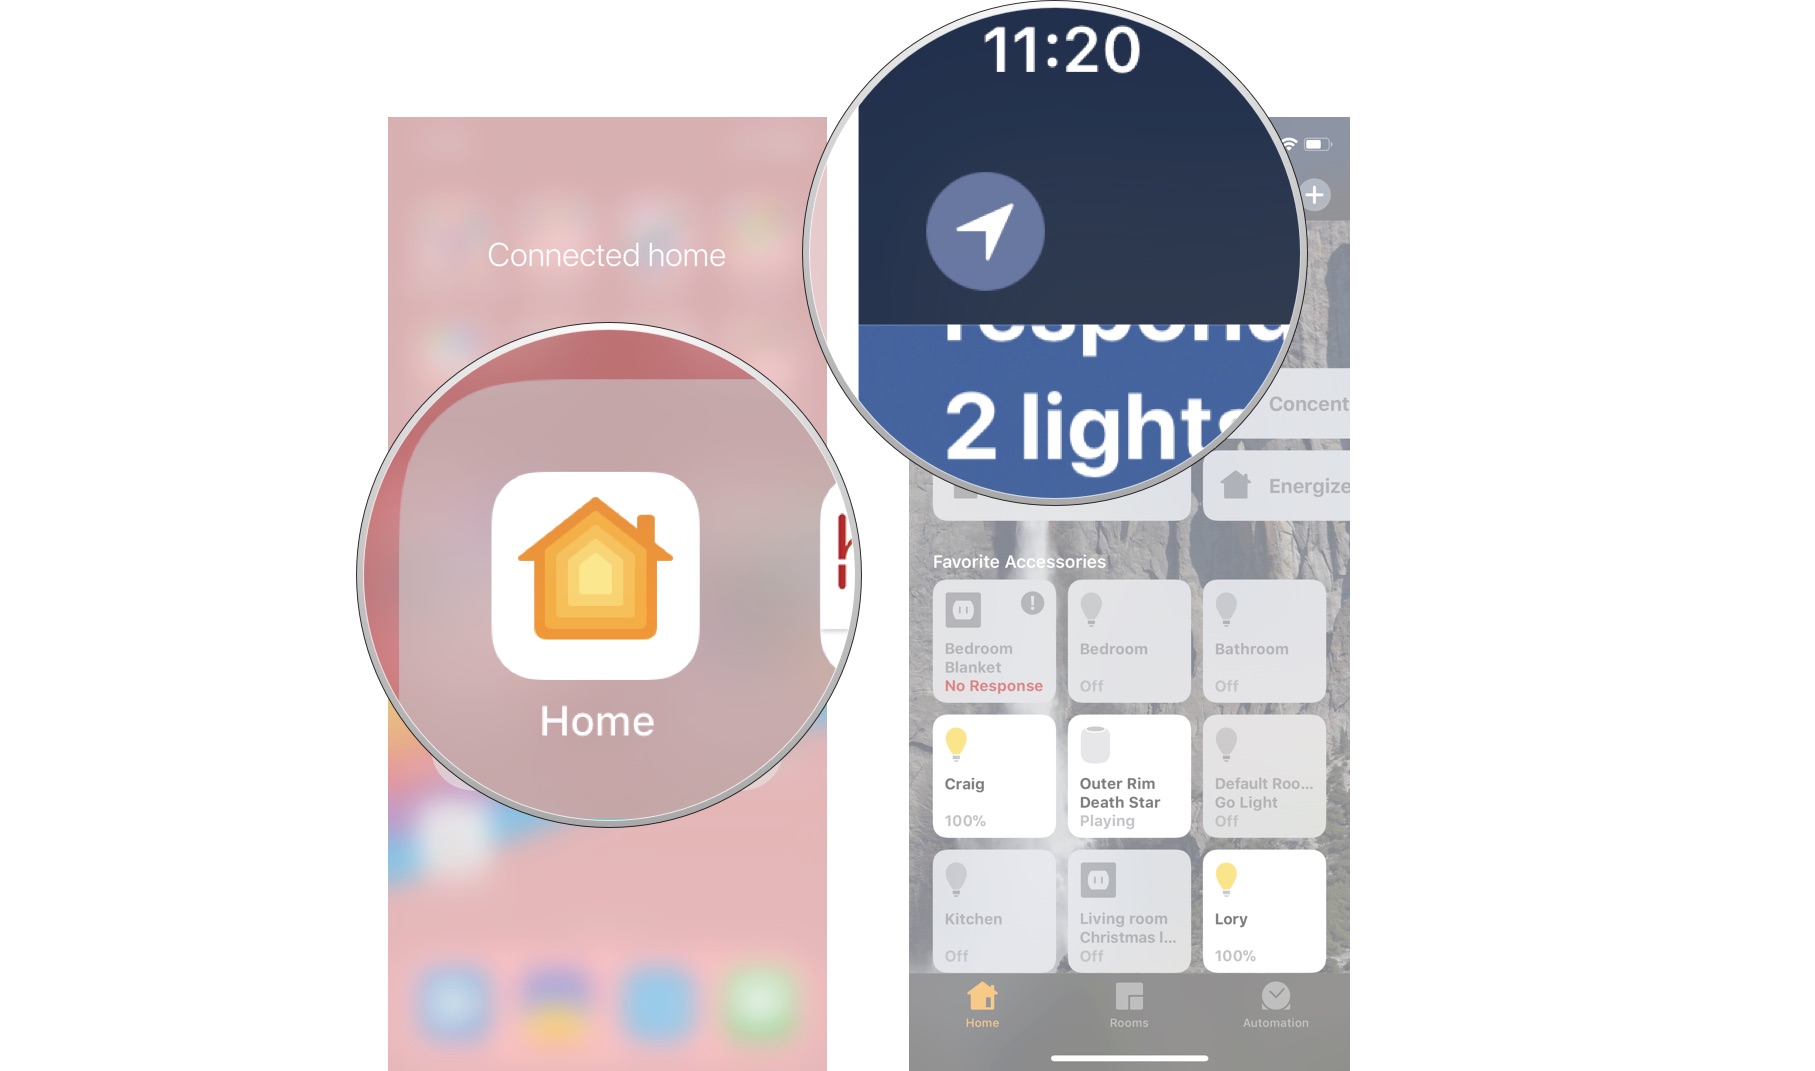 Launch the Home app, then tap the Add Home button